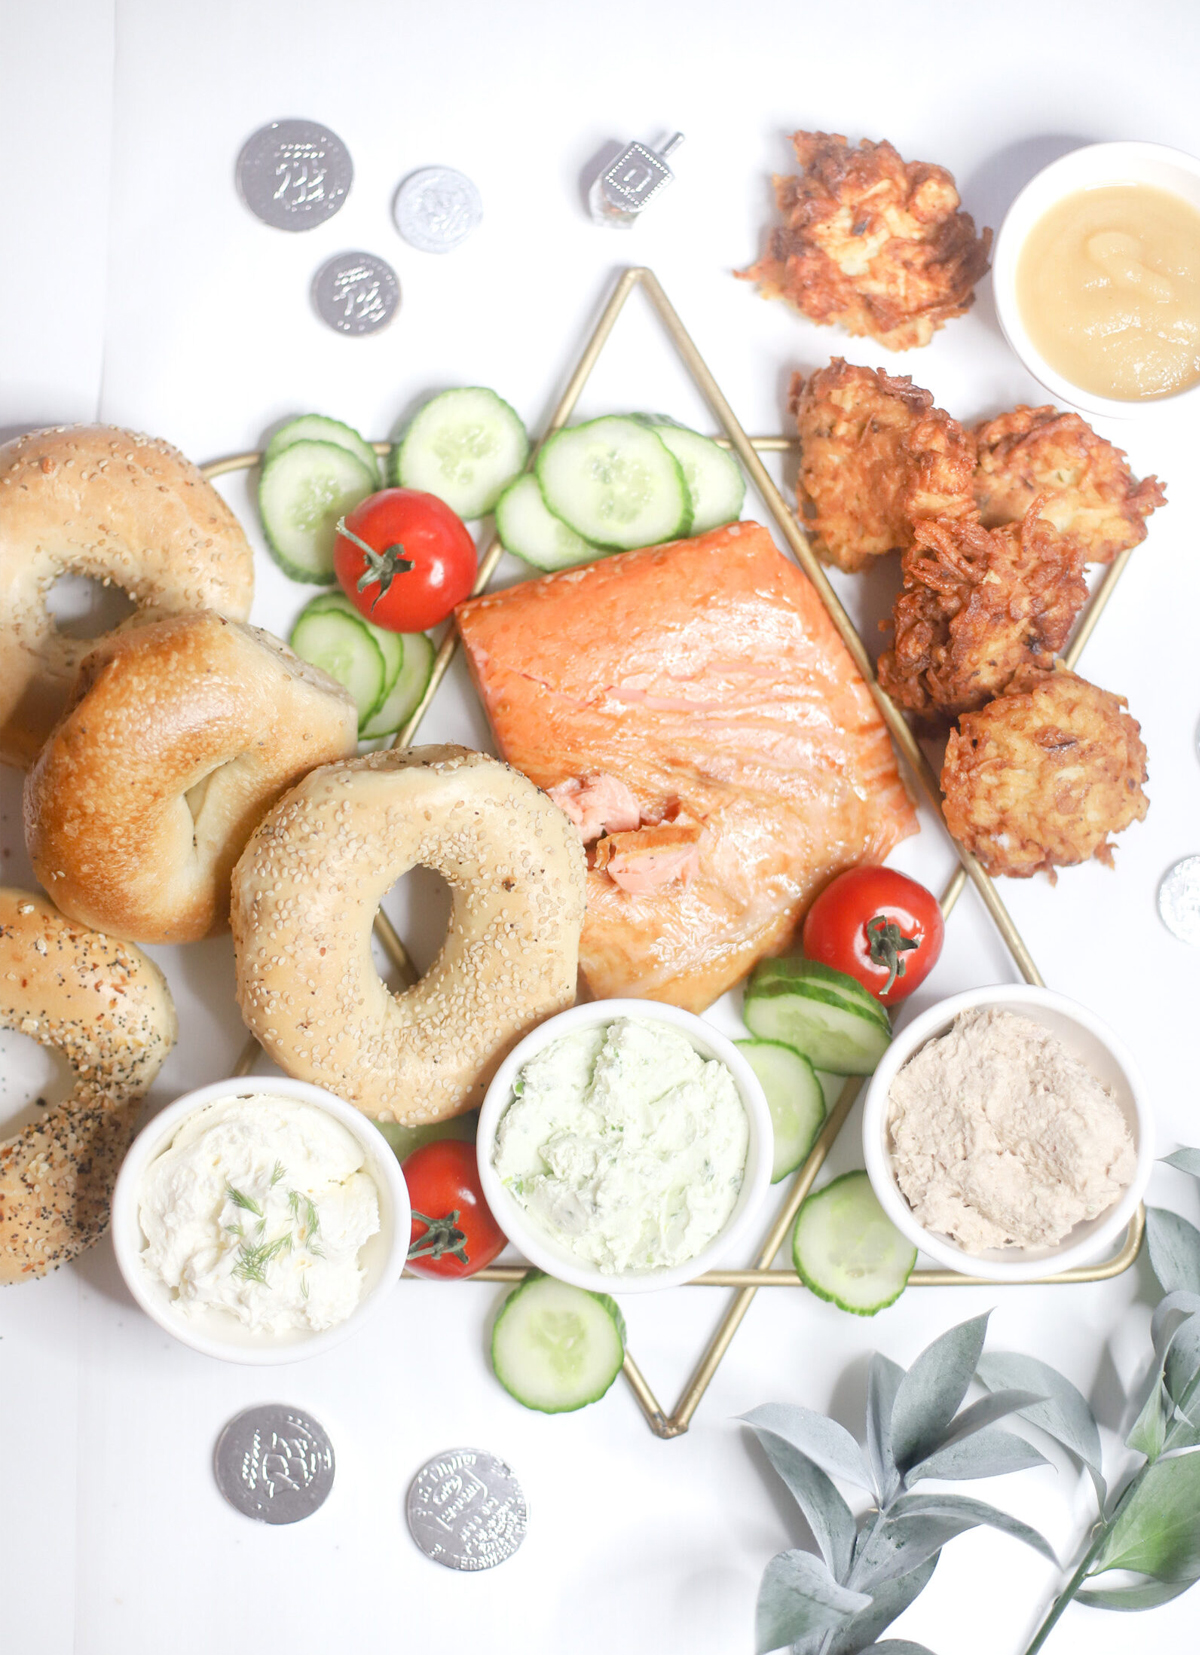 pan seared salmon, bagels, latkes, and dips make up this board from glitter inc.